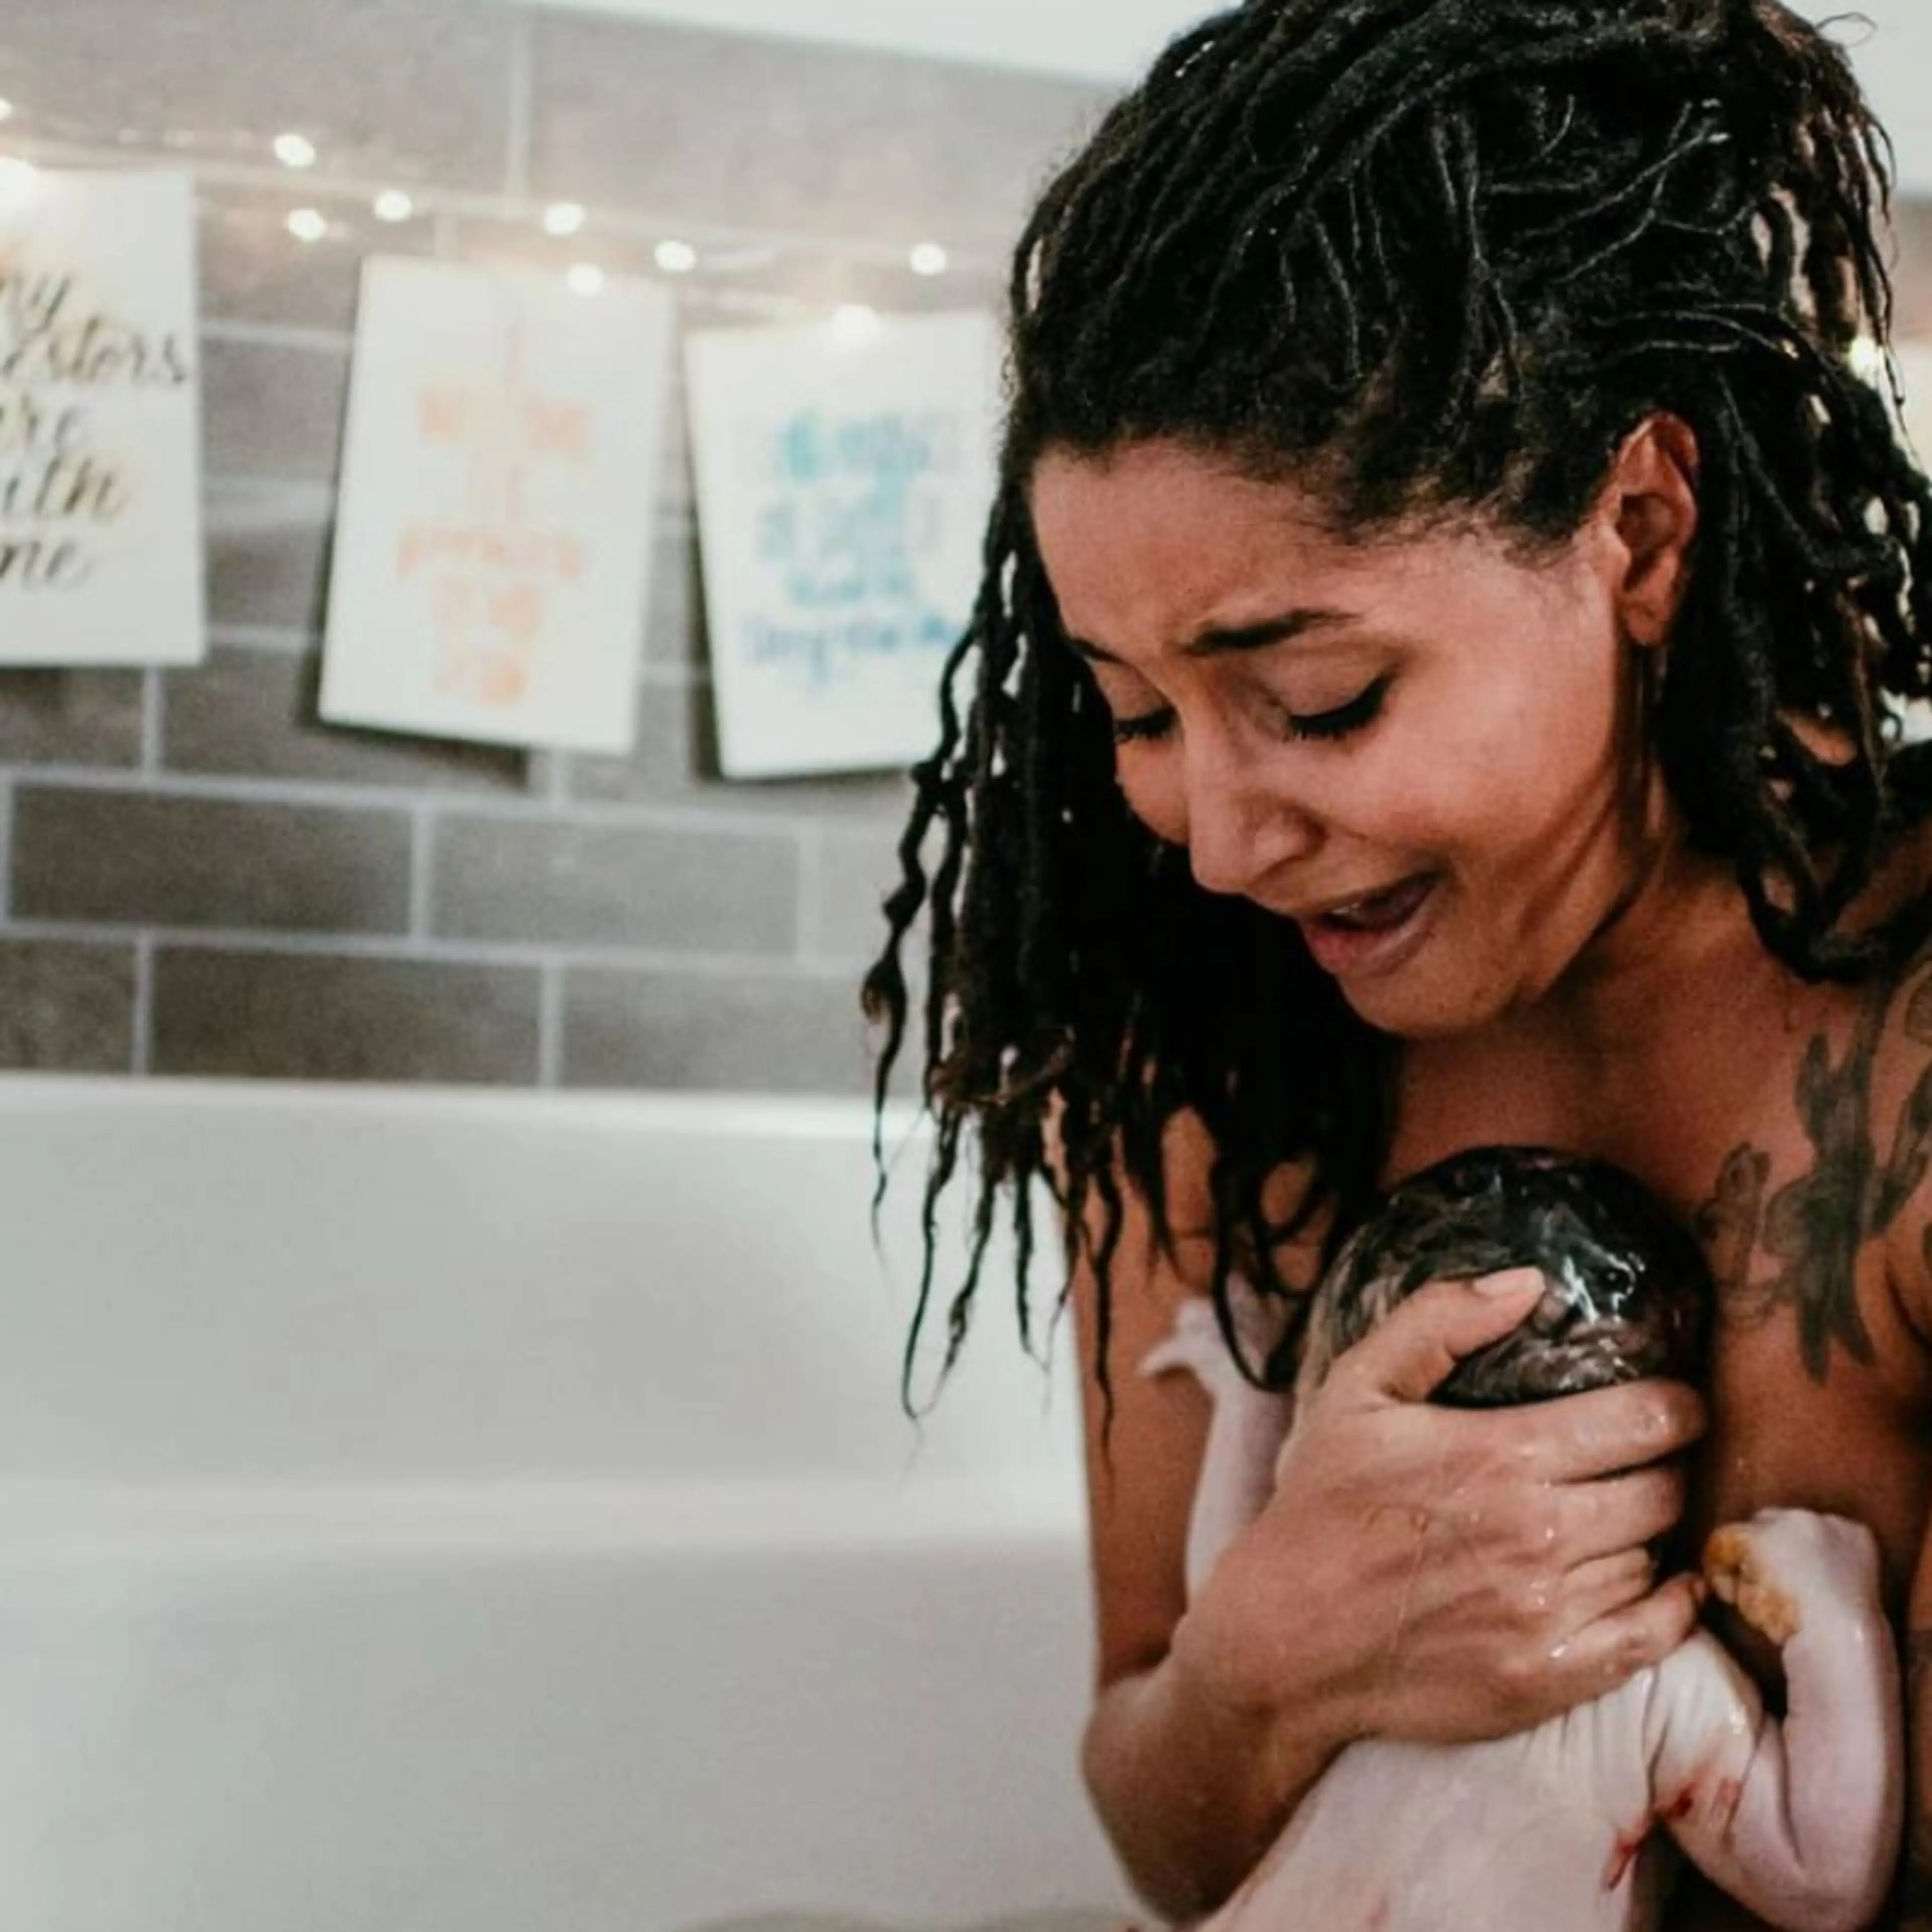 A Doula’s Guide to Using Birth Affirmations During Labor